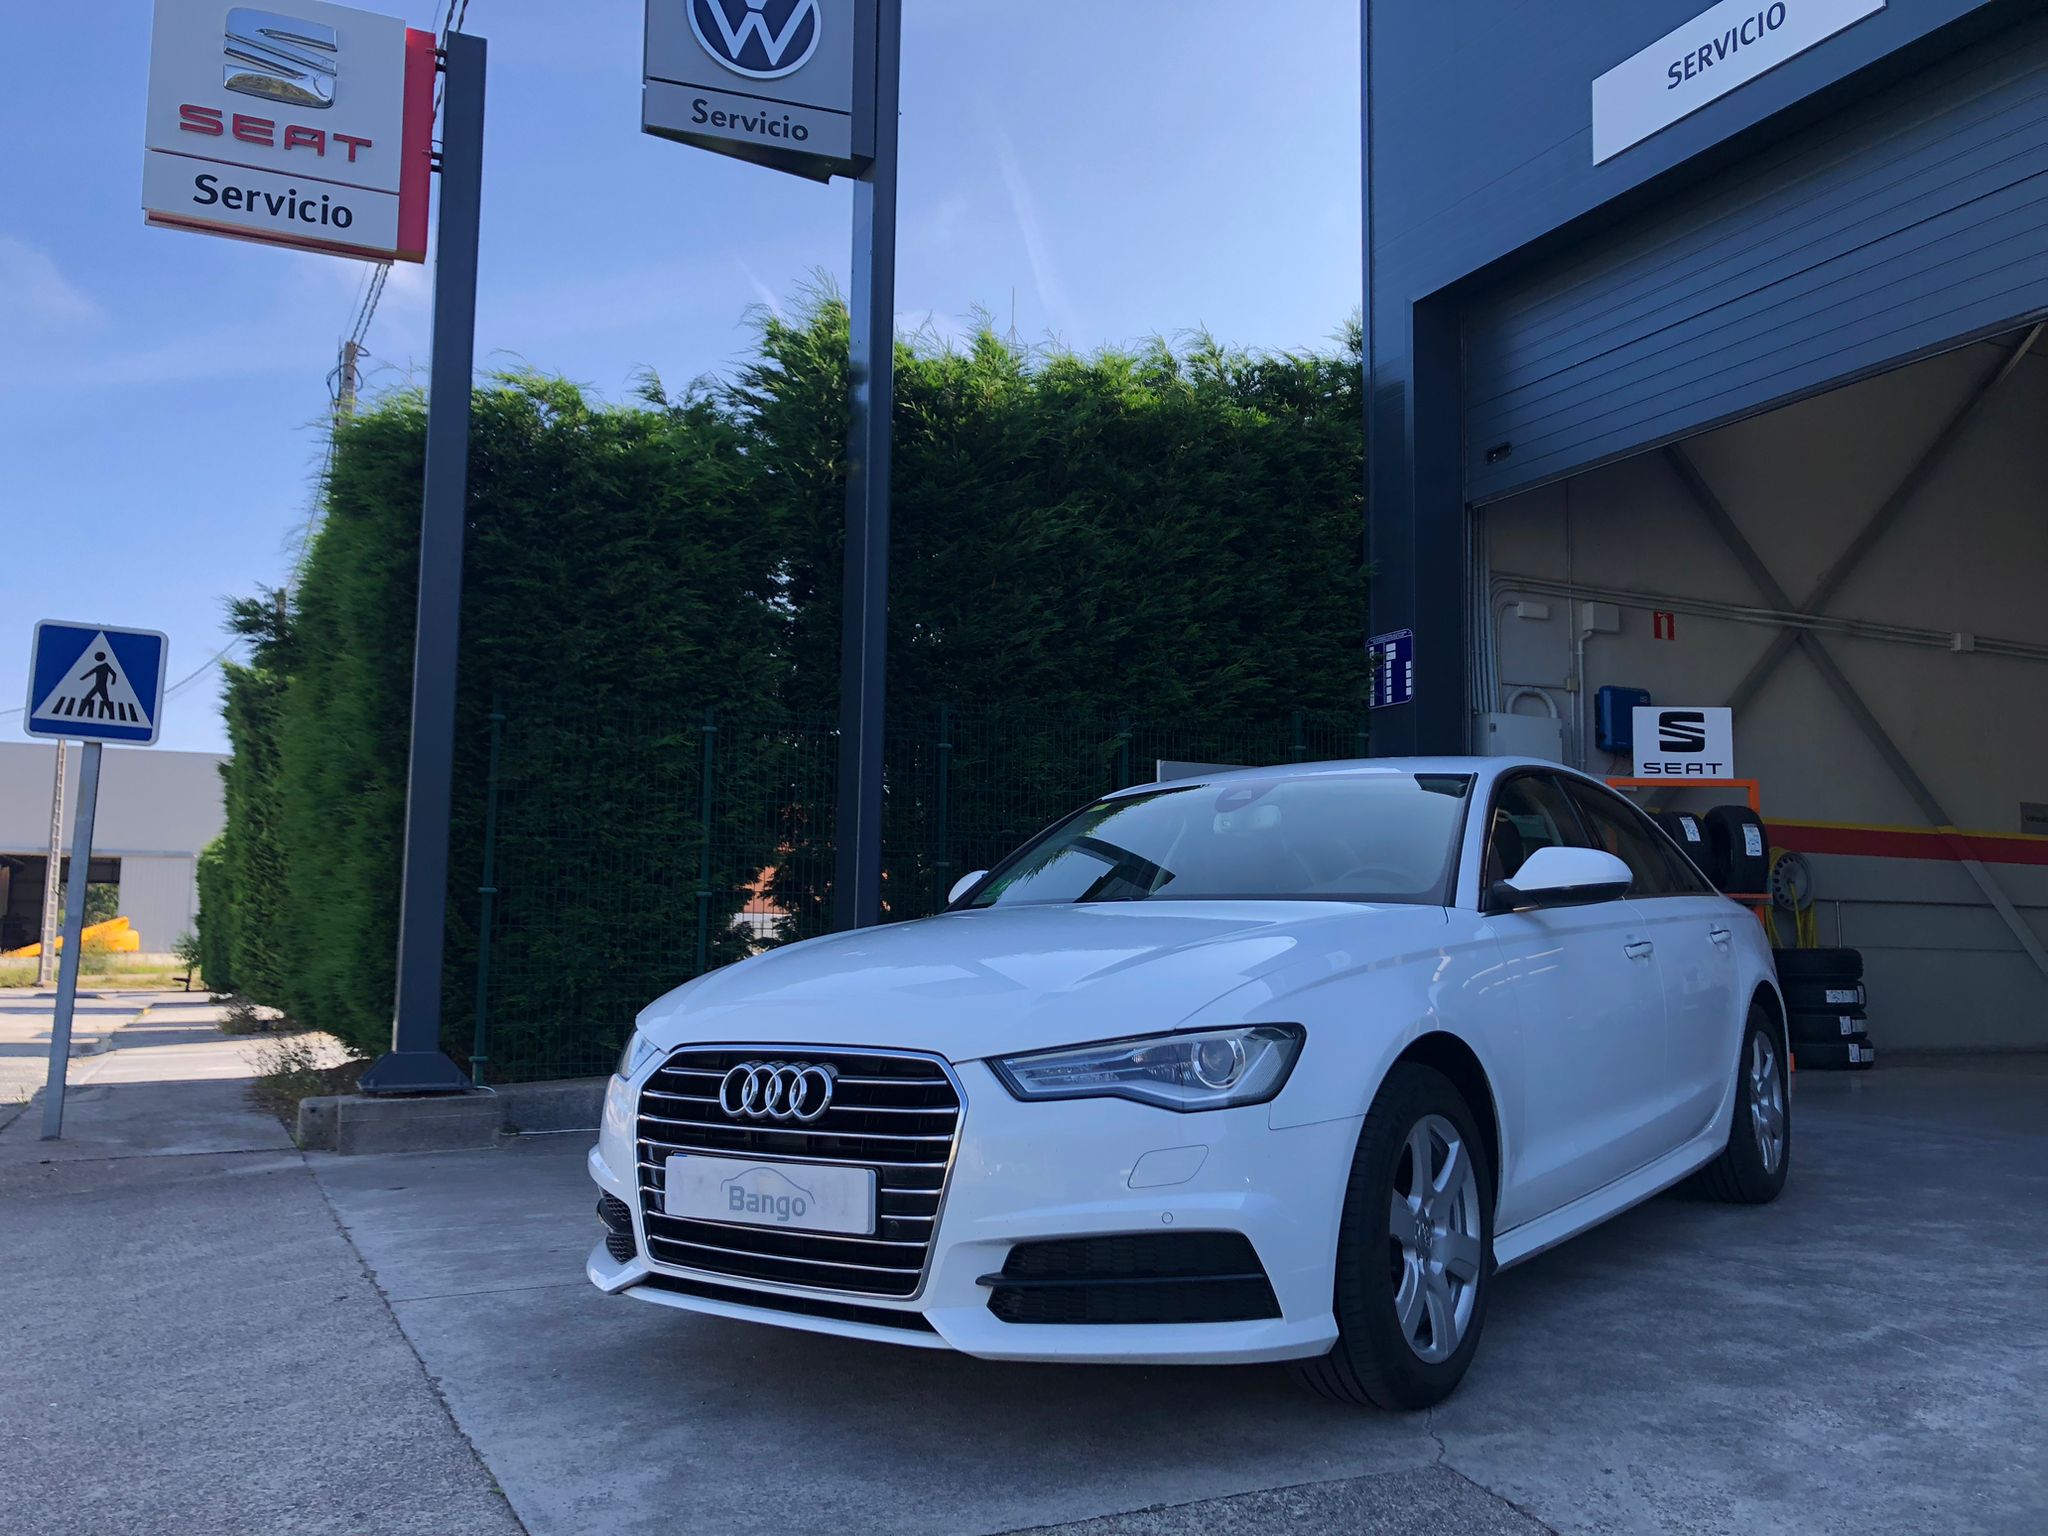 AUDI - A6 2.0 TDI 110kW150CV ultra S tronic frontal lateral derecho